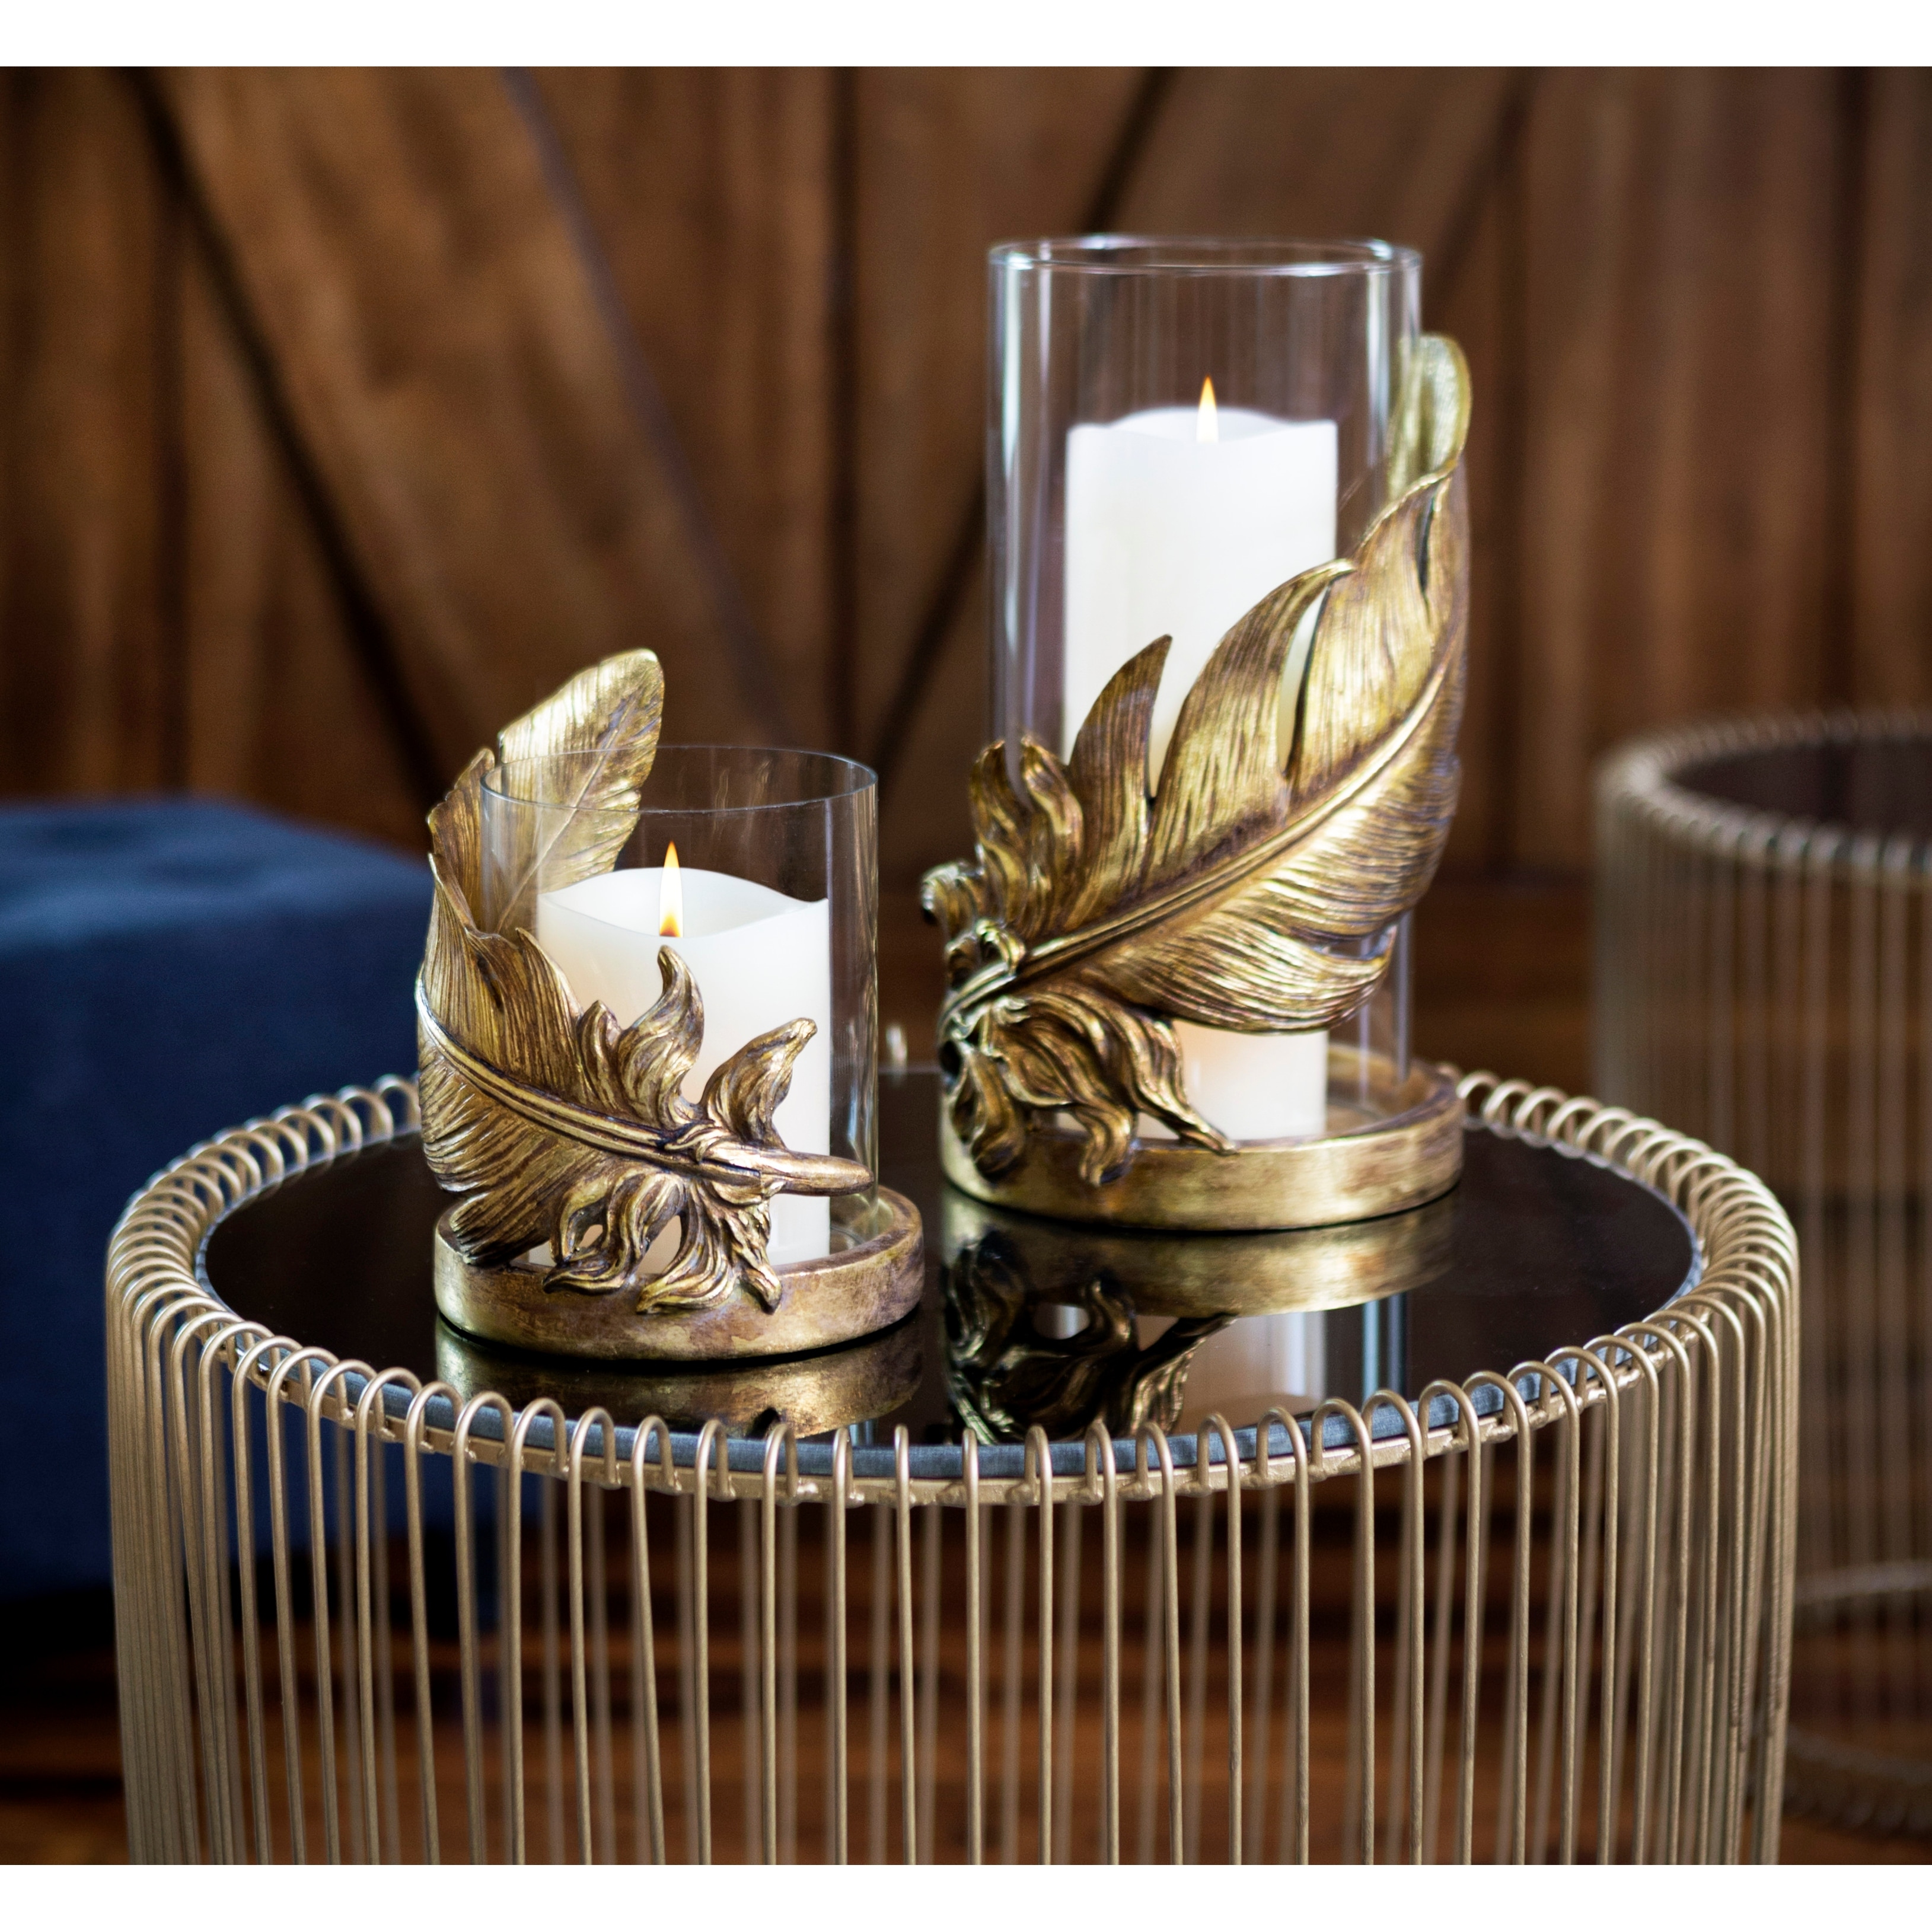 https://ak1.ostkcdn.com/images/products/is/images/direct/2b463cd8889f52cb46d6fdb26eeb4482ae145e6c/Gold-Polystone-Traditional-Candle-Holder-10-x-6-x-6.jpg